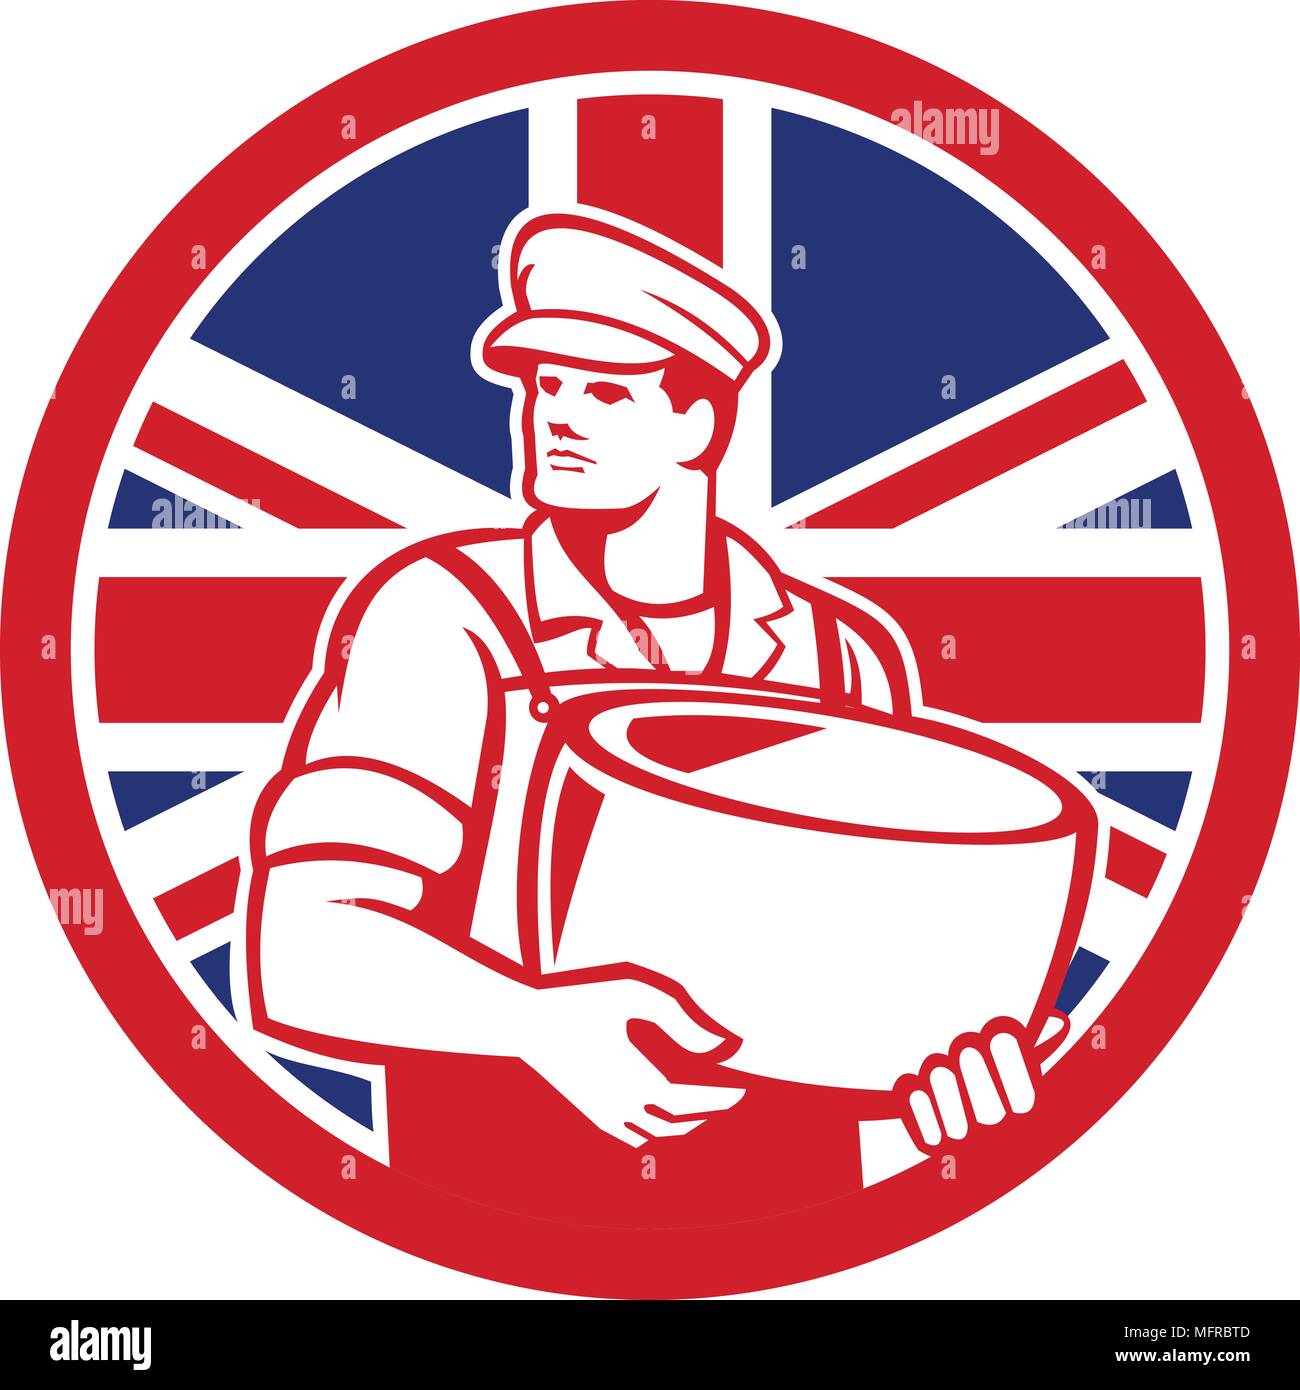 Icon retro style illustration of a British artisan cheesemaker or cheese maker holding Parmesan cheese with United Kingdom UK, Great Britain Union Jac Stock Vector